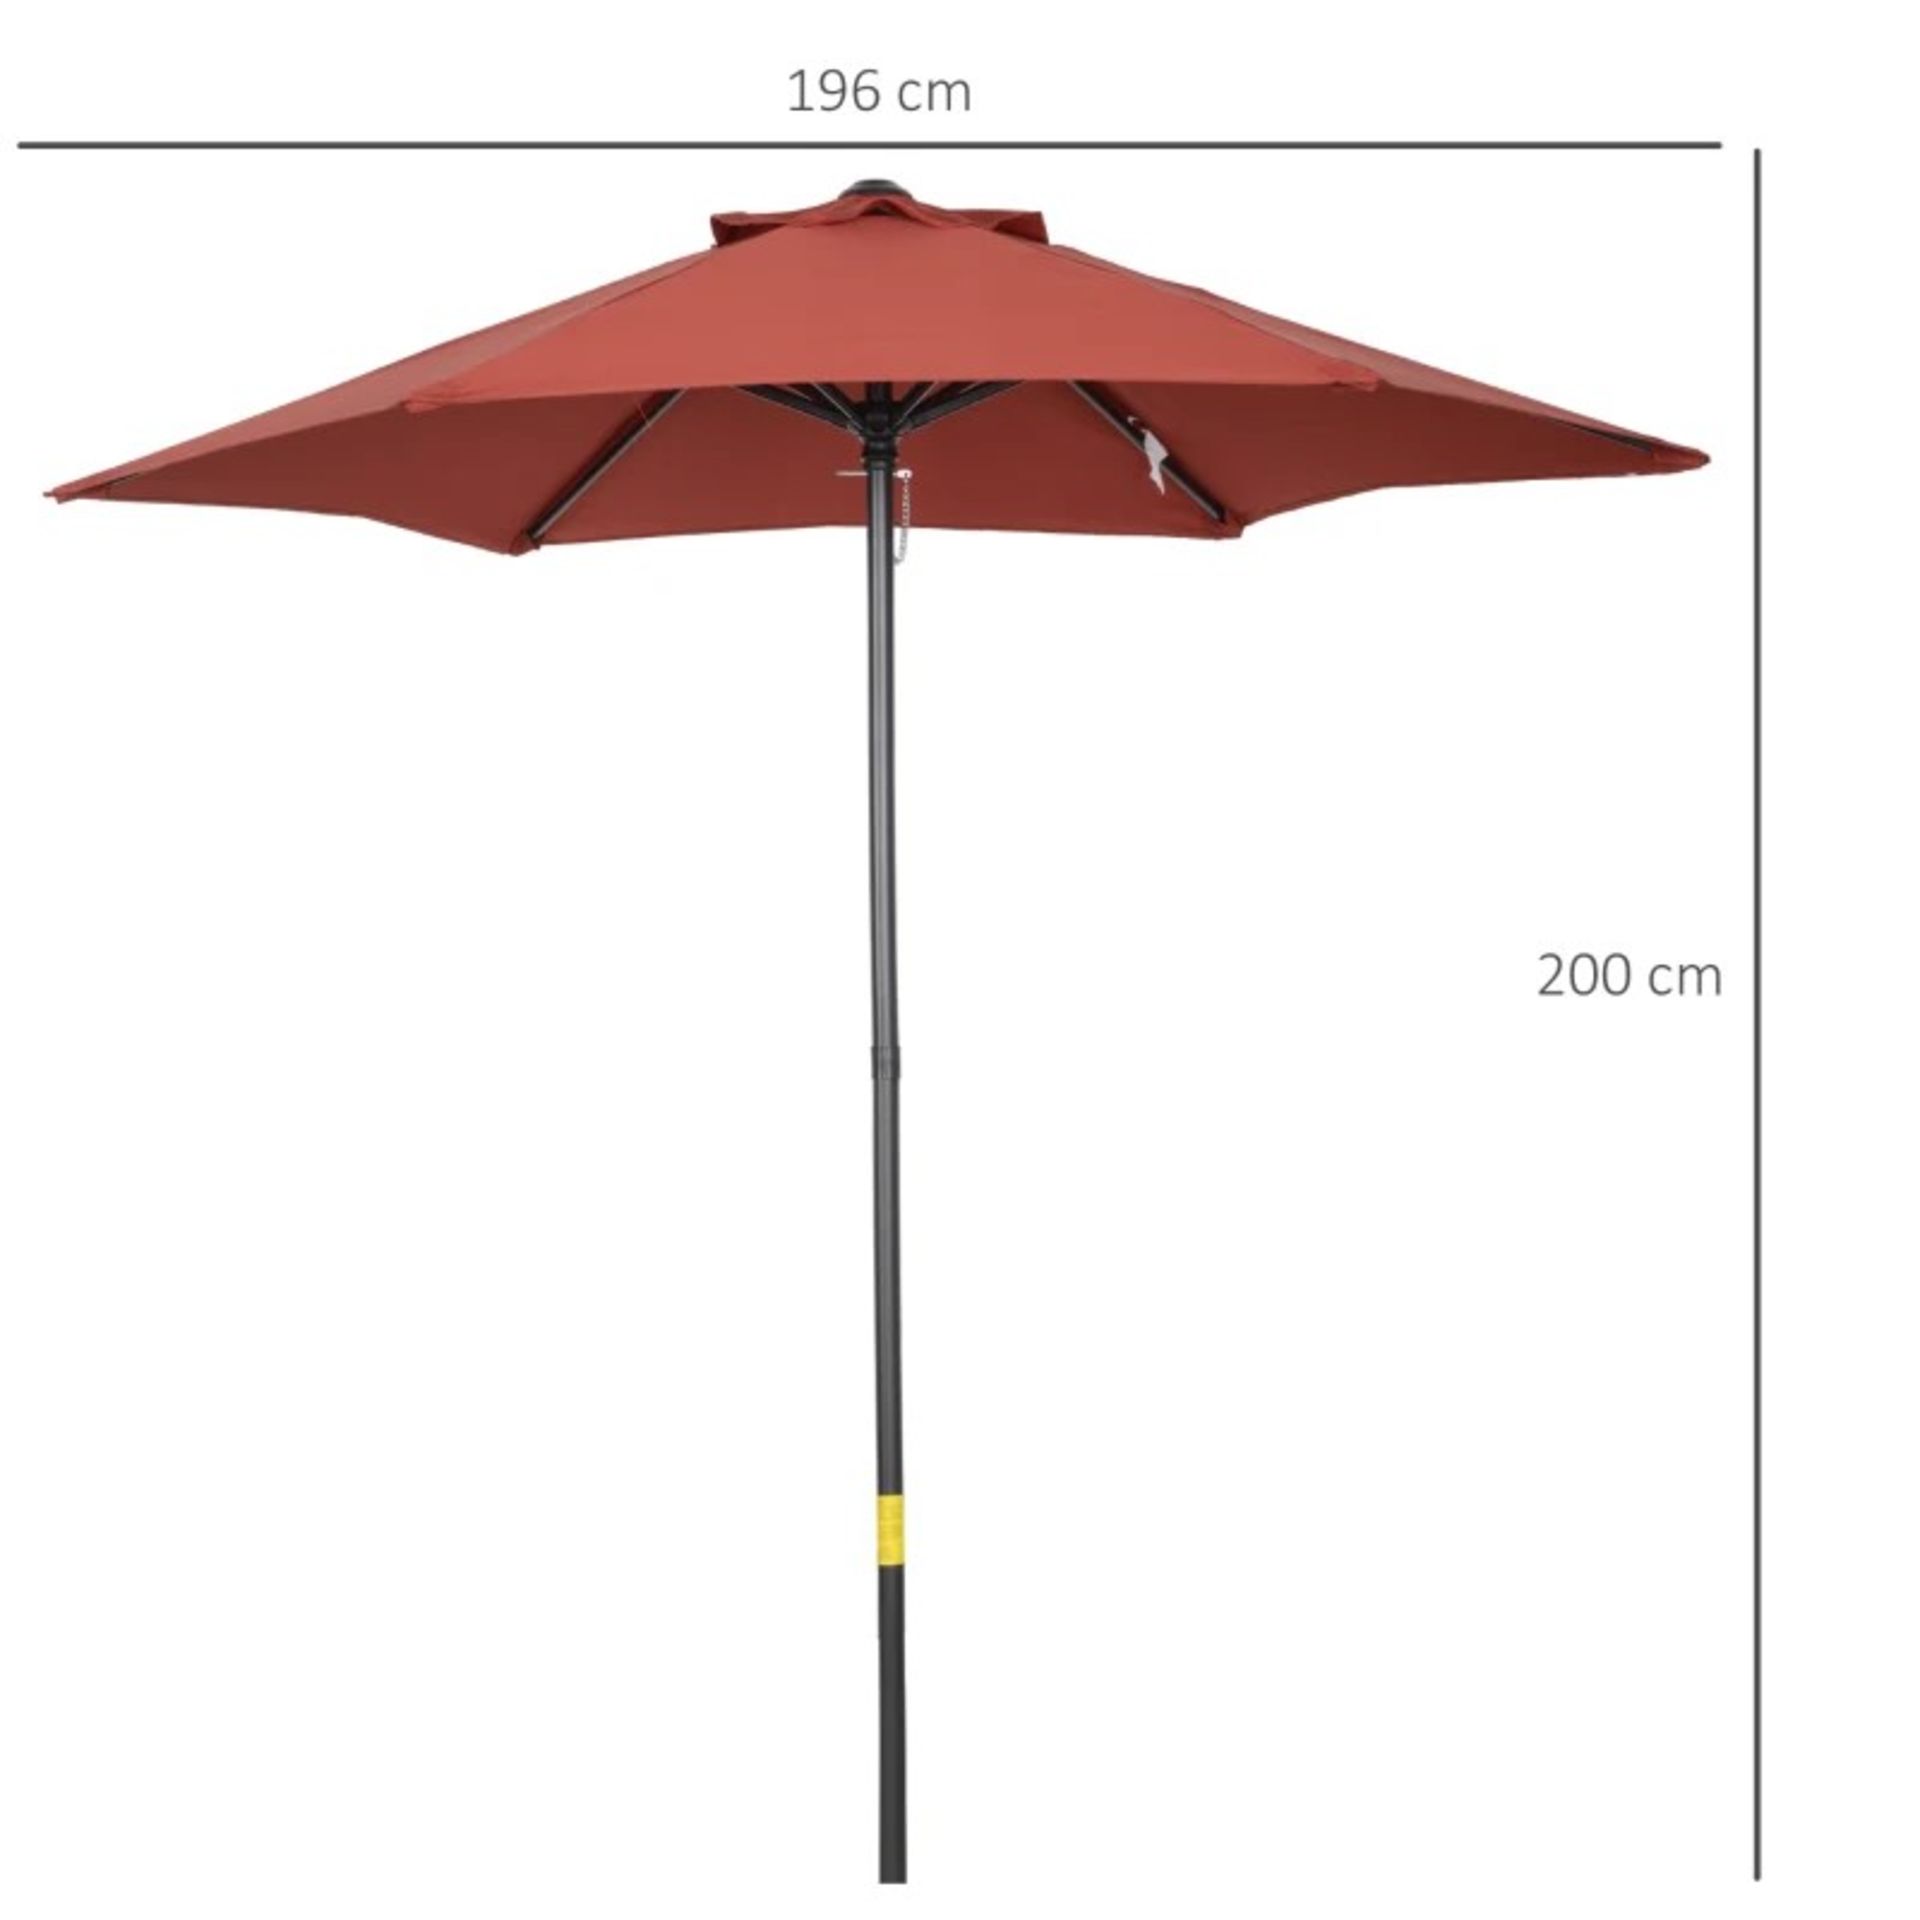 RRP £49.99 - 2m Parasol Patio Umbrella, Outdoor Sun Shade with 6 Sturdy Ribs for Balcony, Bench, - Image 3 of 3